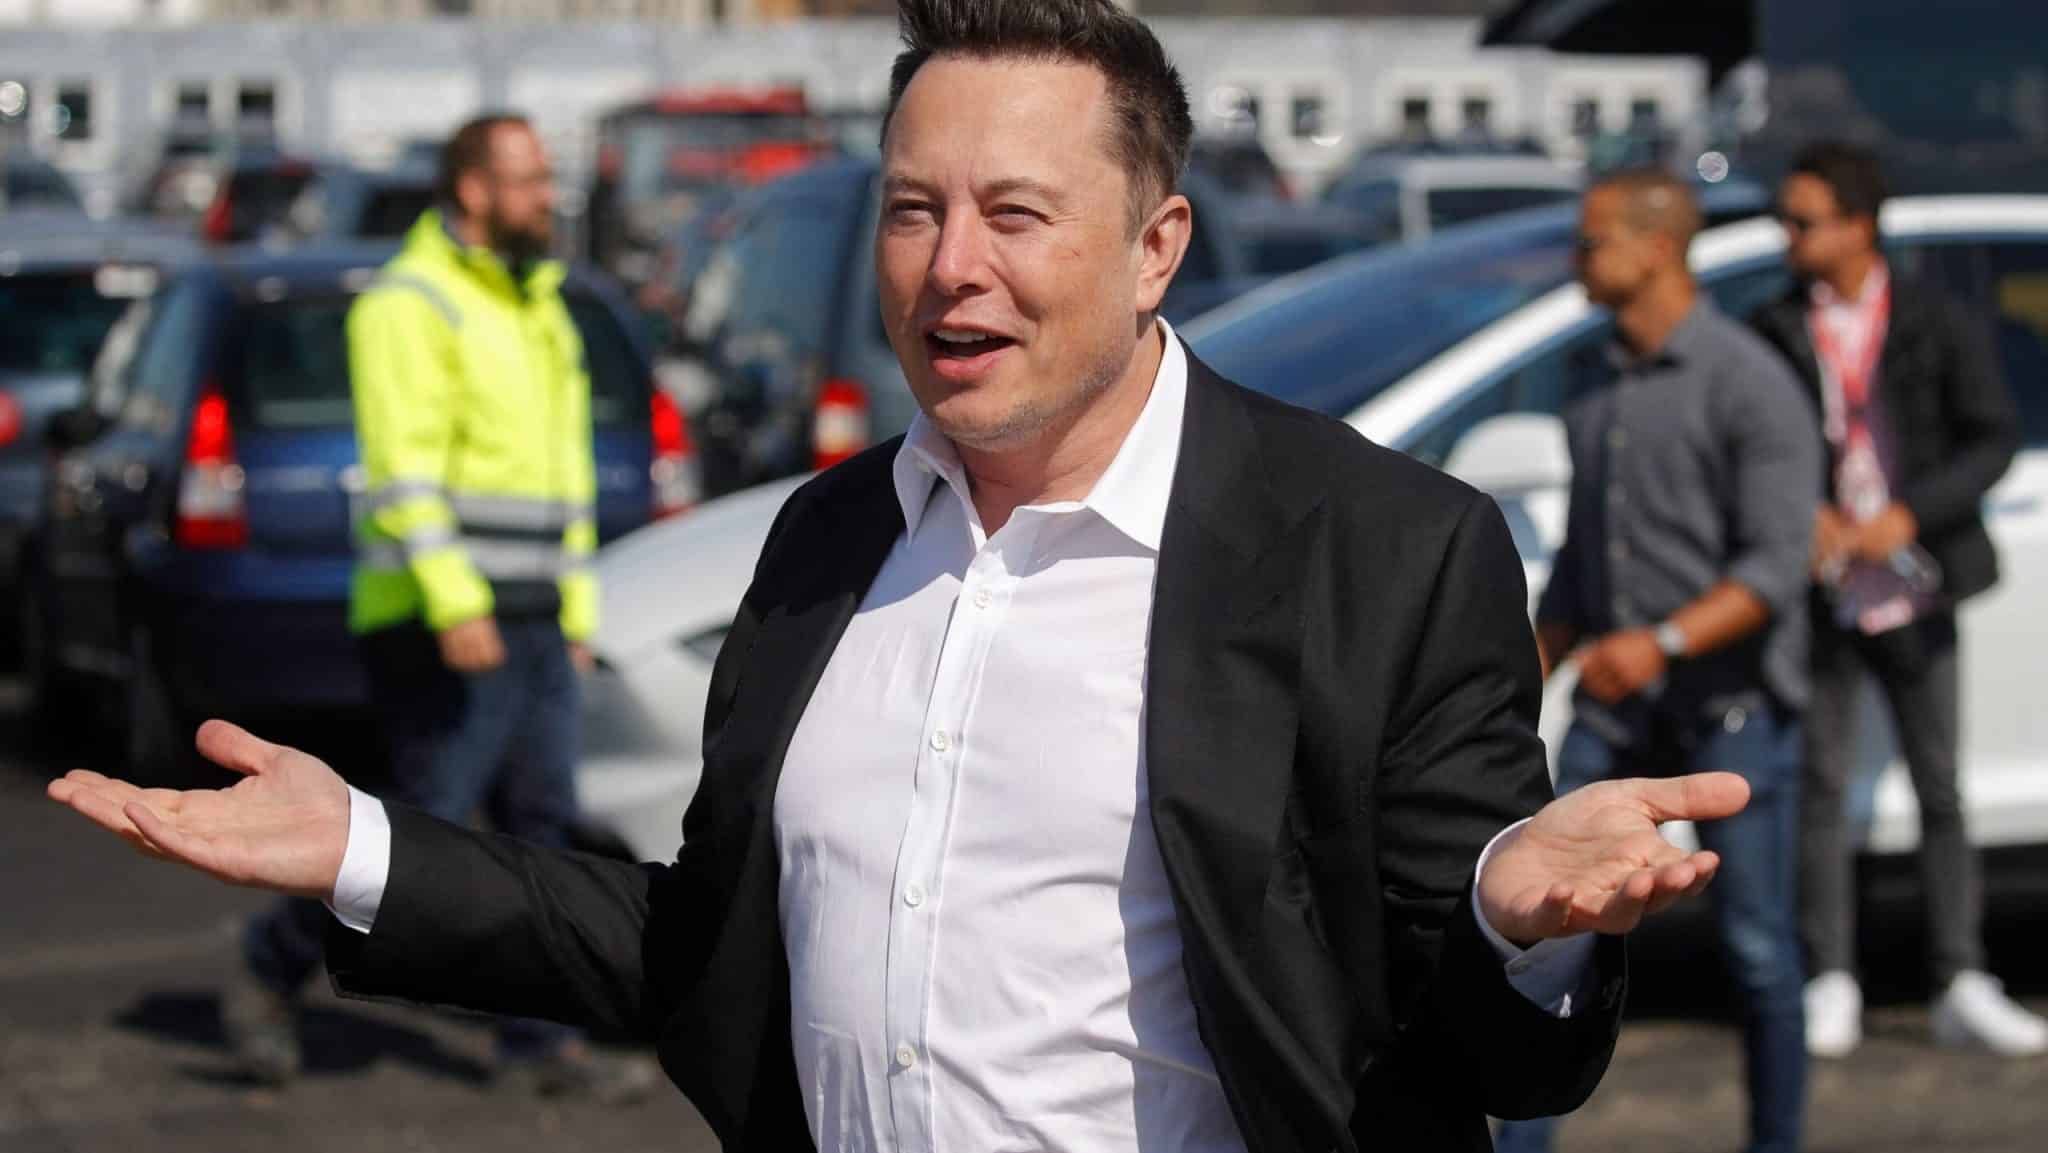 Elon Musk offers to sell Tesla stock 'right now' if the UN can prove where the money is going